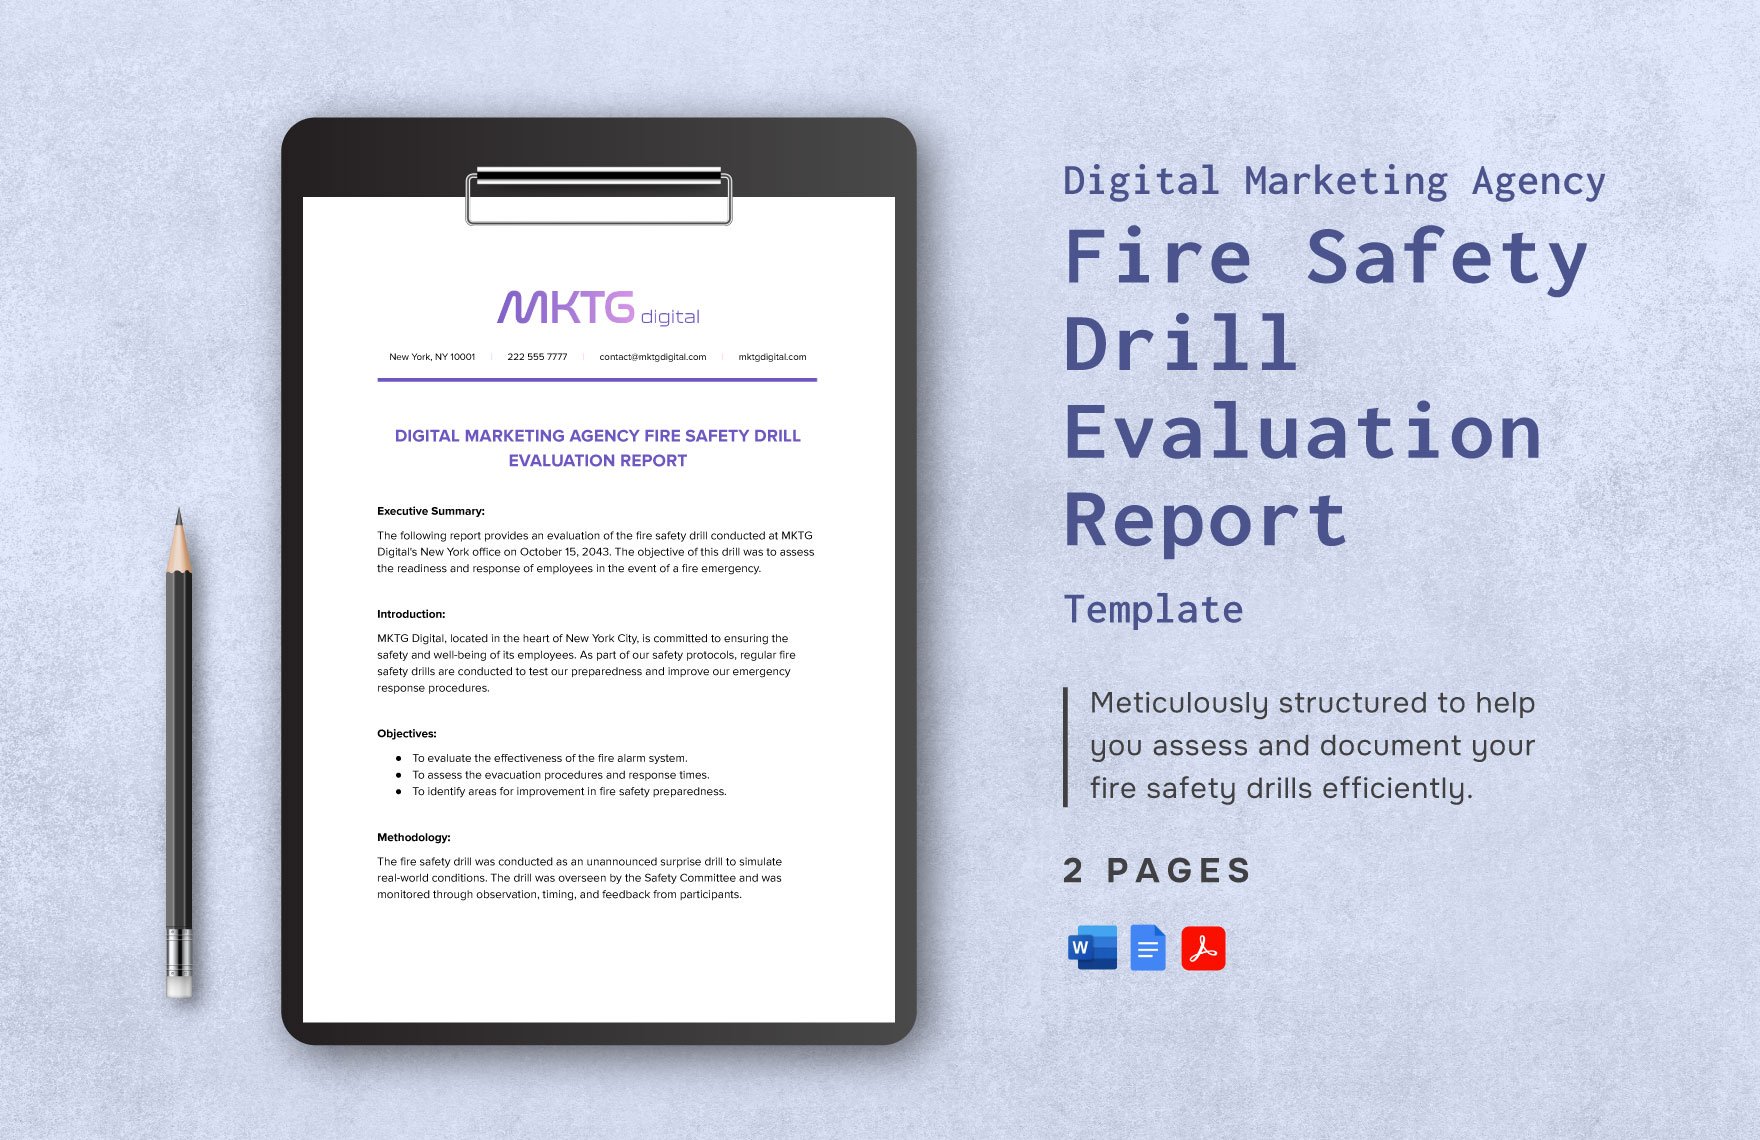 Digital Marketing Agency Fire Safety Drill Evaluation Report Template